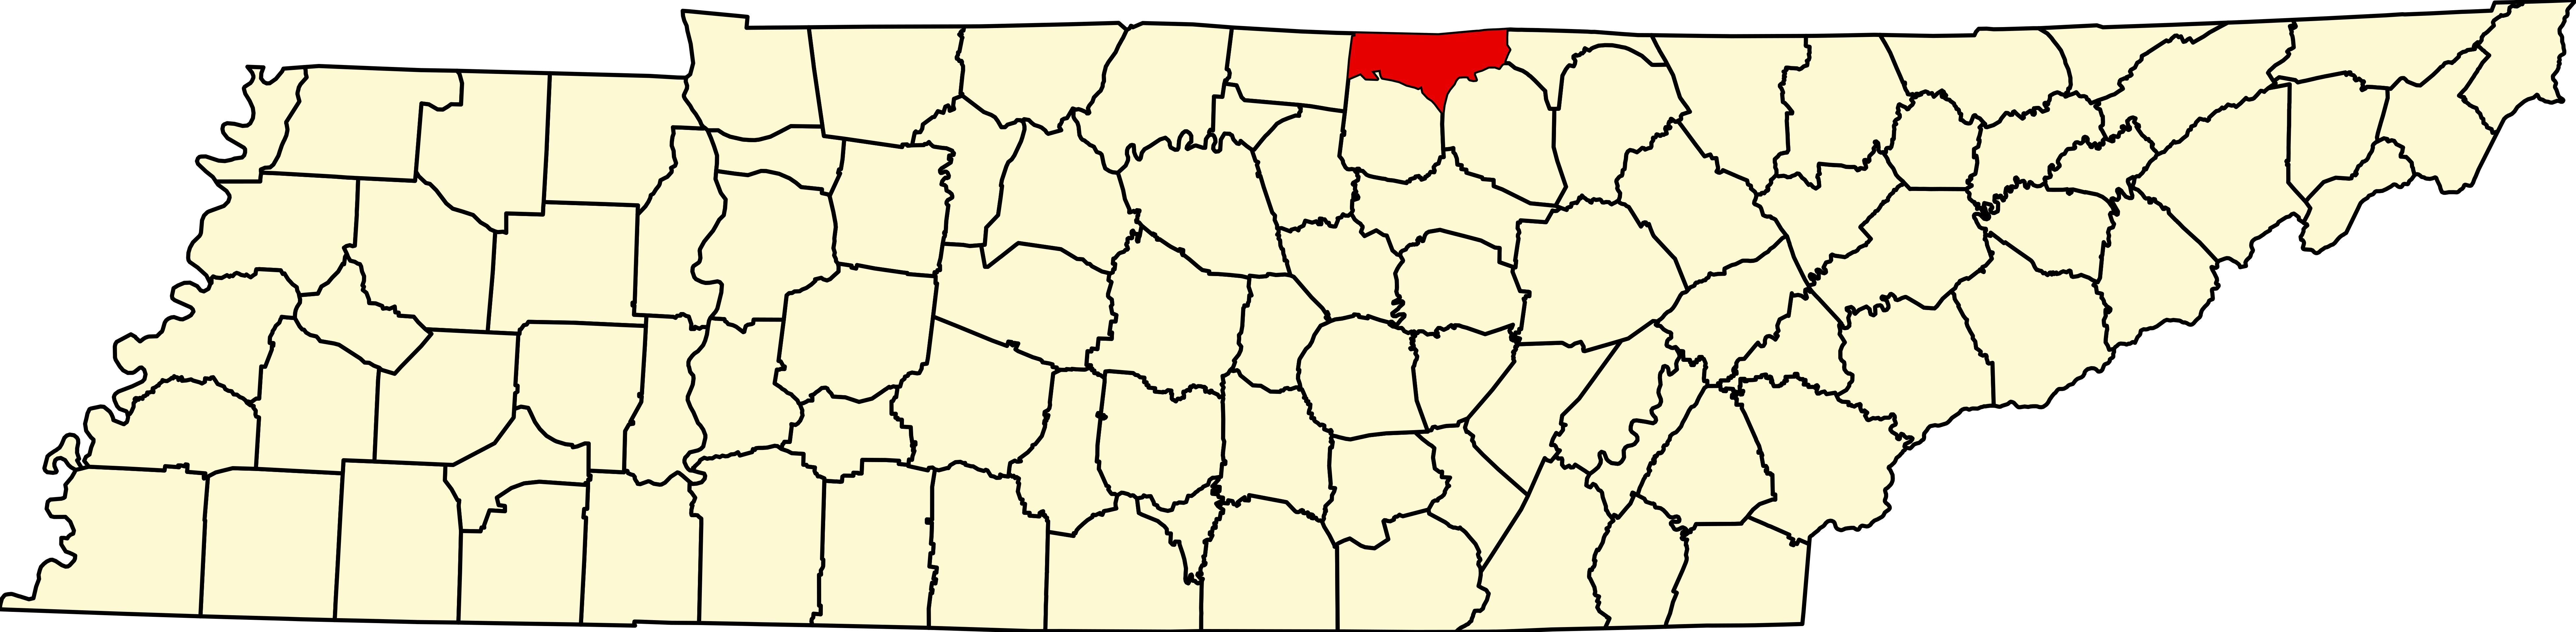 upload.wikimedia.org/wikipedia/commons/thumb/c/c4/Map_of_Tennessee_highlighting_Clay_County.svg/7814px-Map_of_Tennessee_highlighting_Clay_County.svg.png